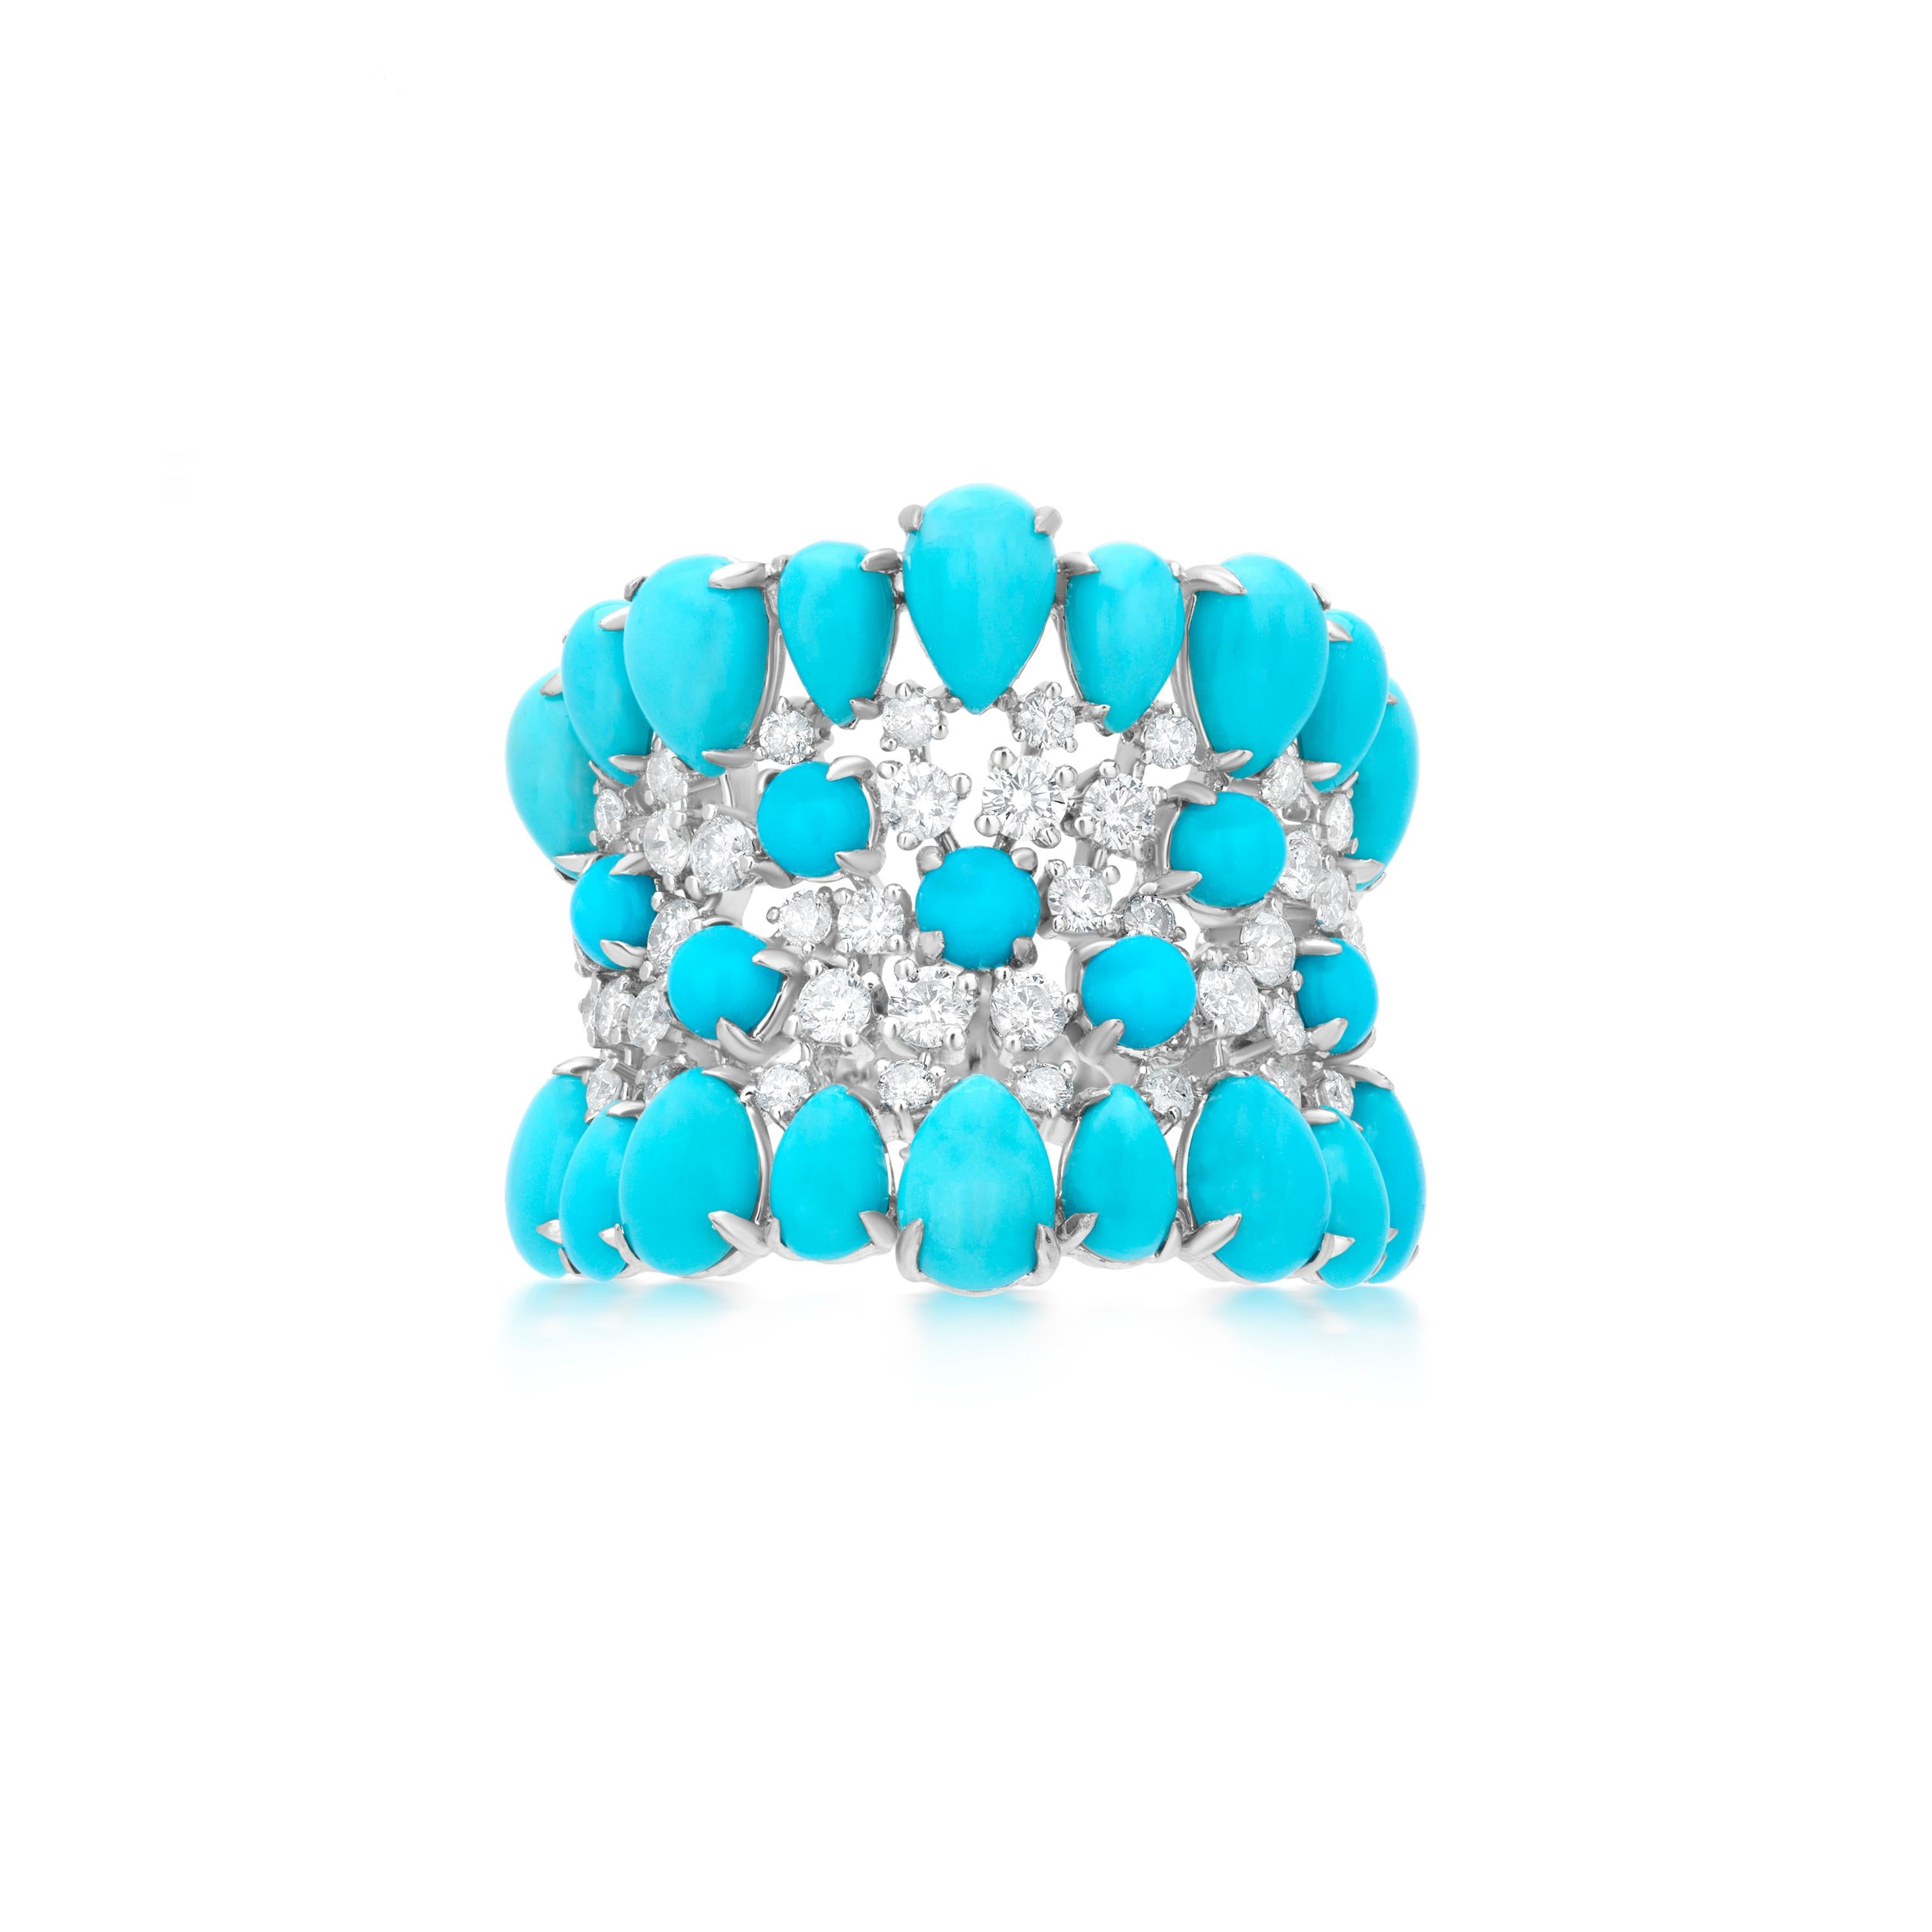 Introducing our stunning Ring with Turquoise and Diamond in 18K White Gold! This gorgeous ring features a dome design with round full cut white diamonds and 10 pear shaped sleeping beauty turquoise studded on the band. It's the perfect piece to add